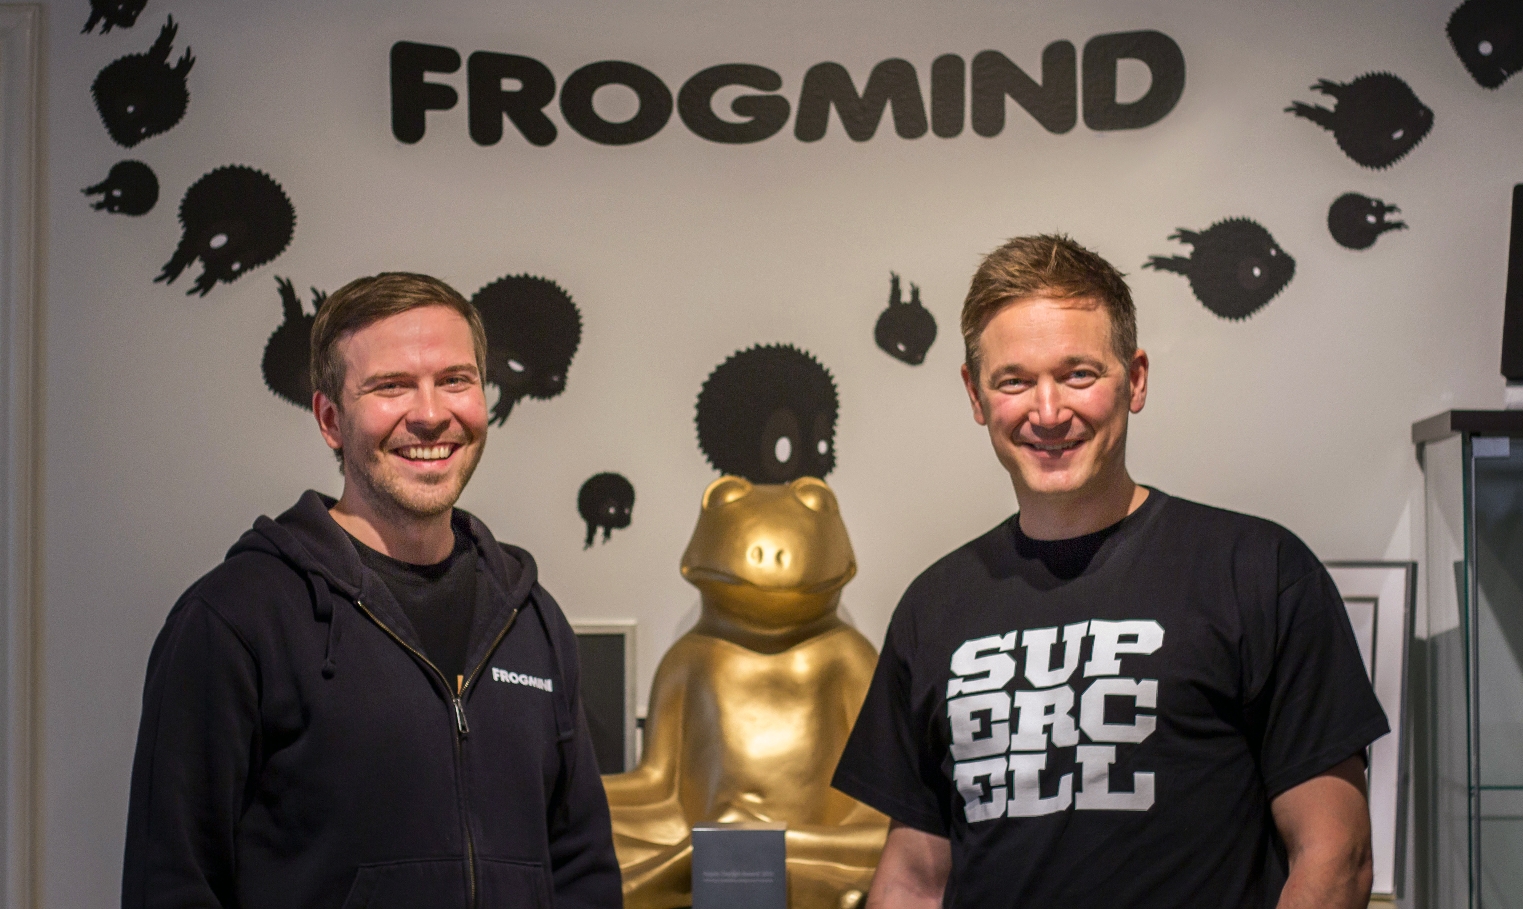 'Badland' Developer Frogmind Acquired by Supercell, Future Games Will be Free-to-Play